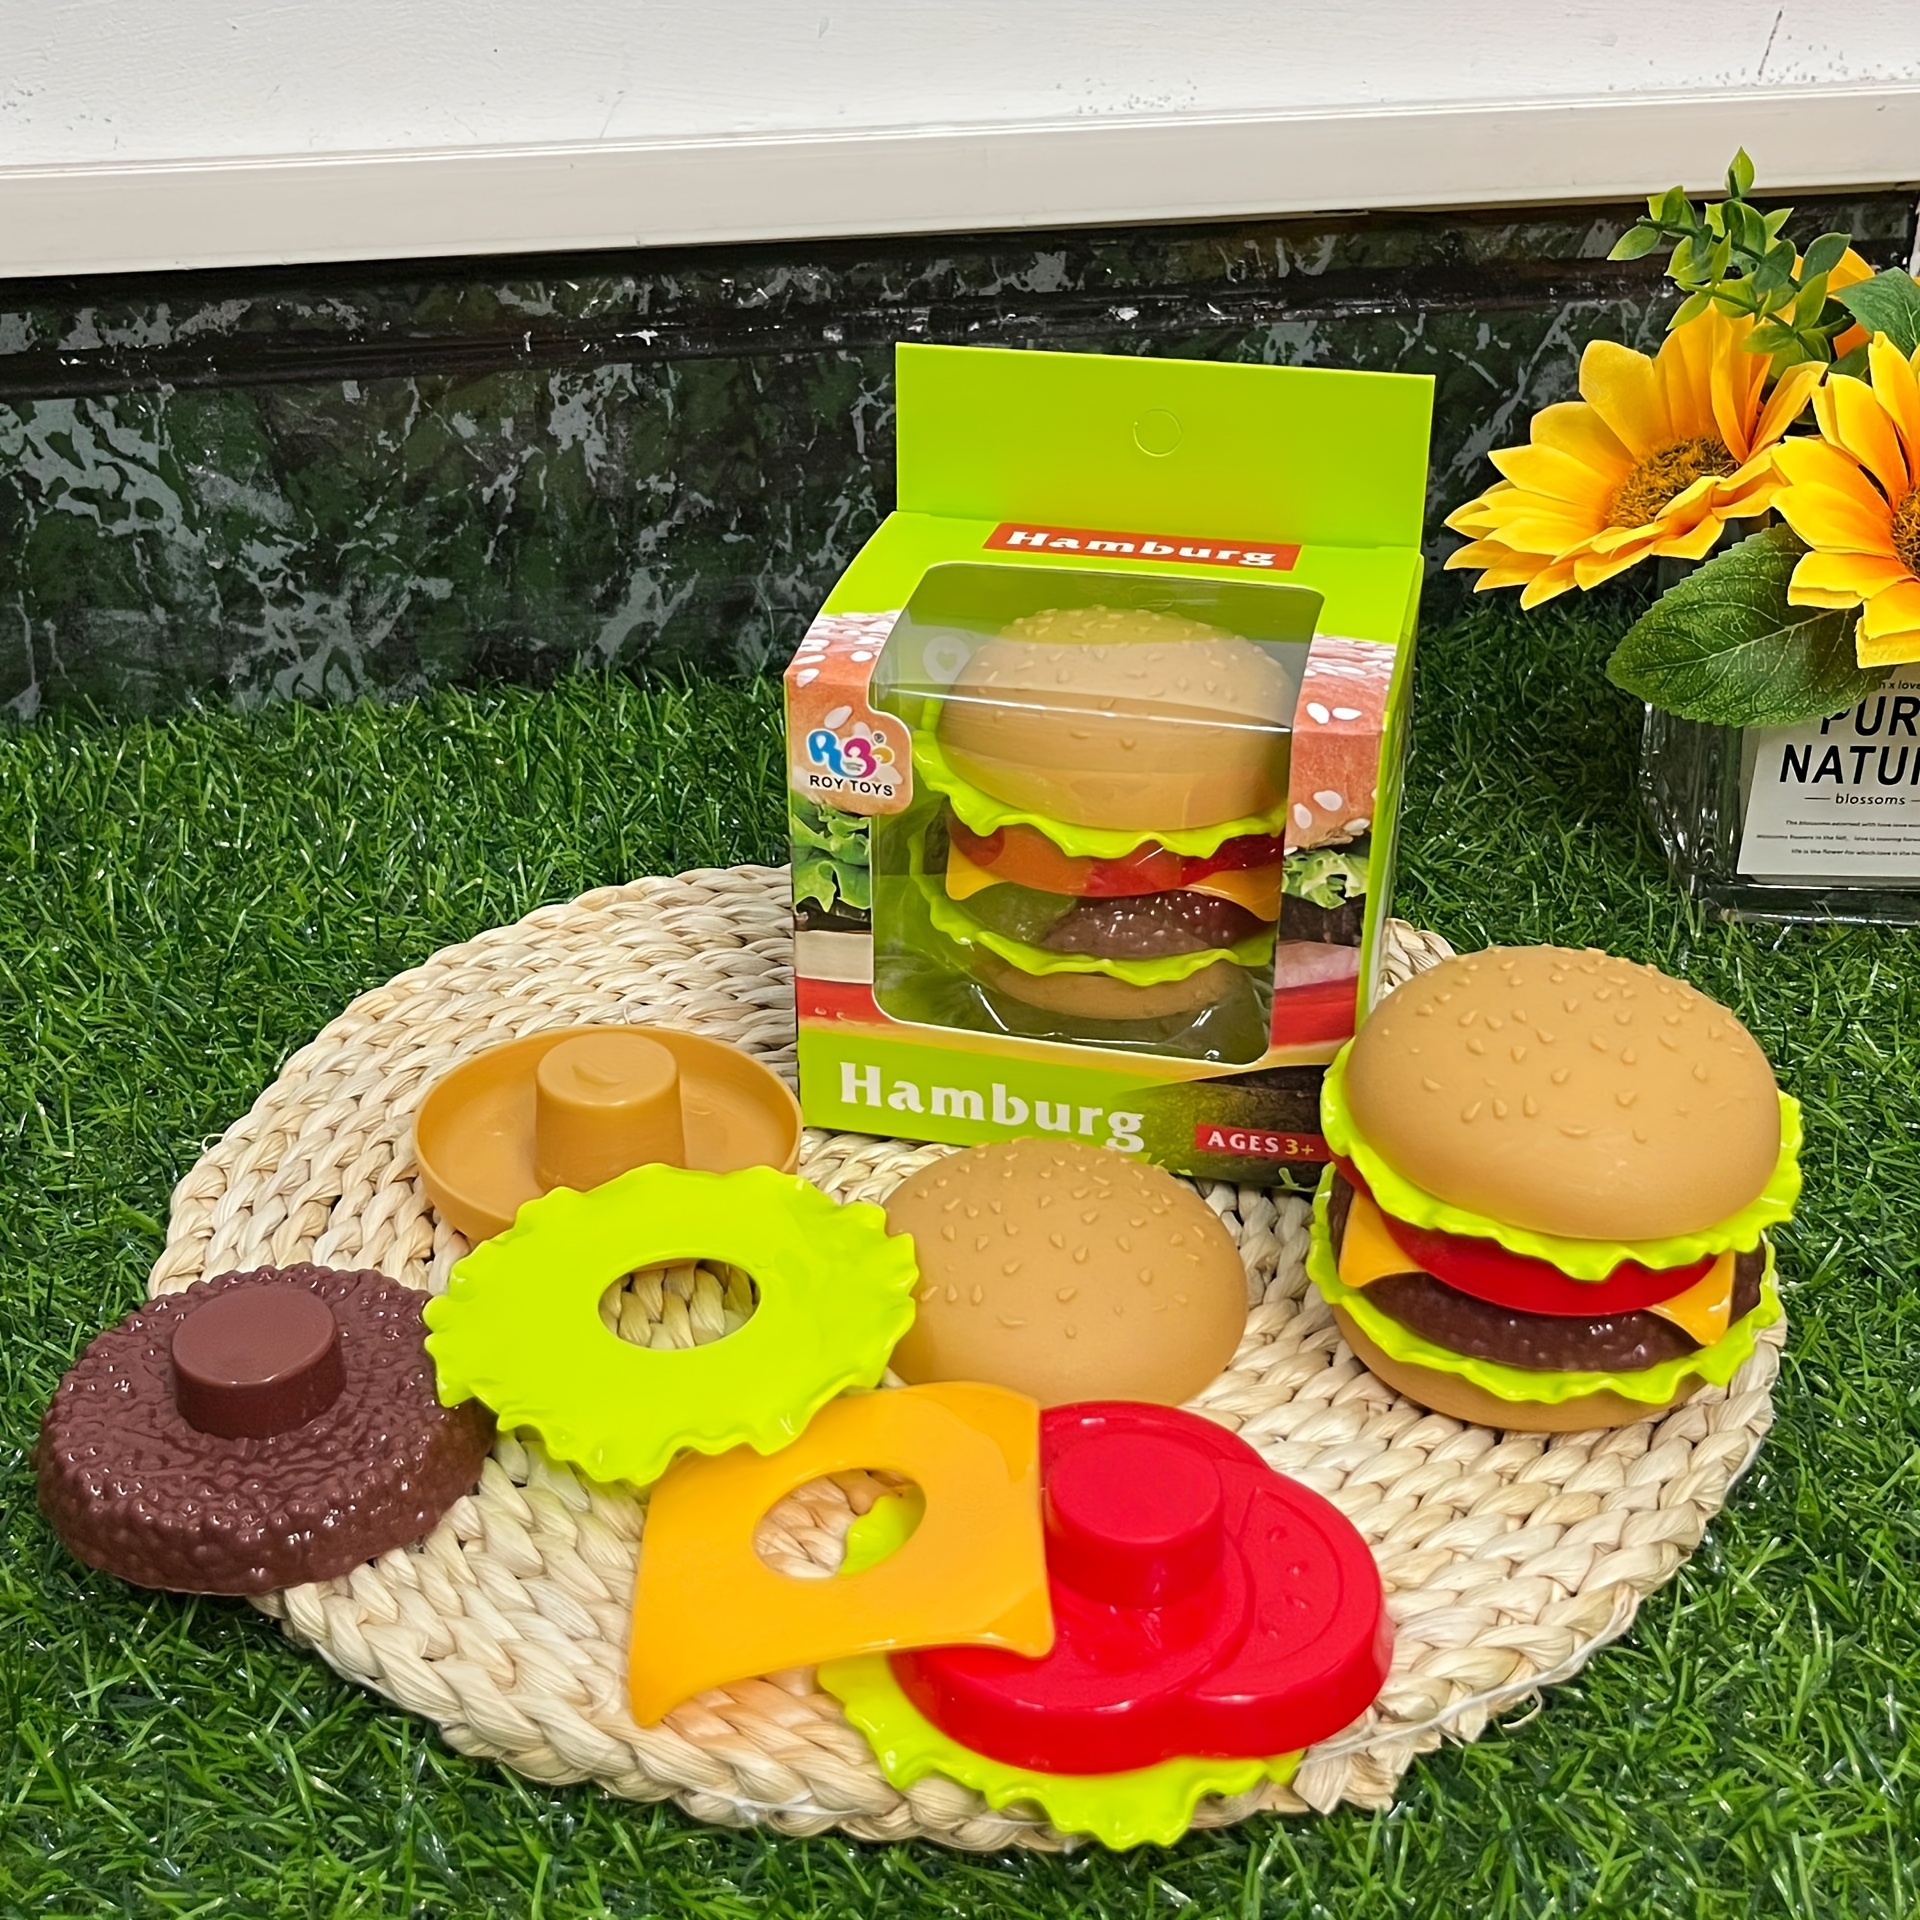 

Hamburger Toy, Disassembly And Assembly Toy Cheeseburger, Simulation Model Play House Kitchen Gift